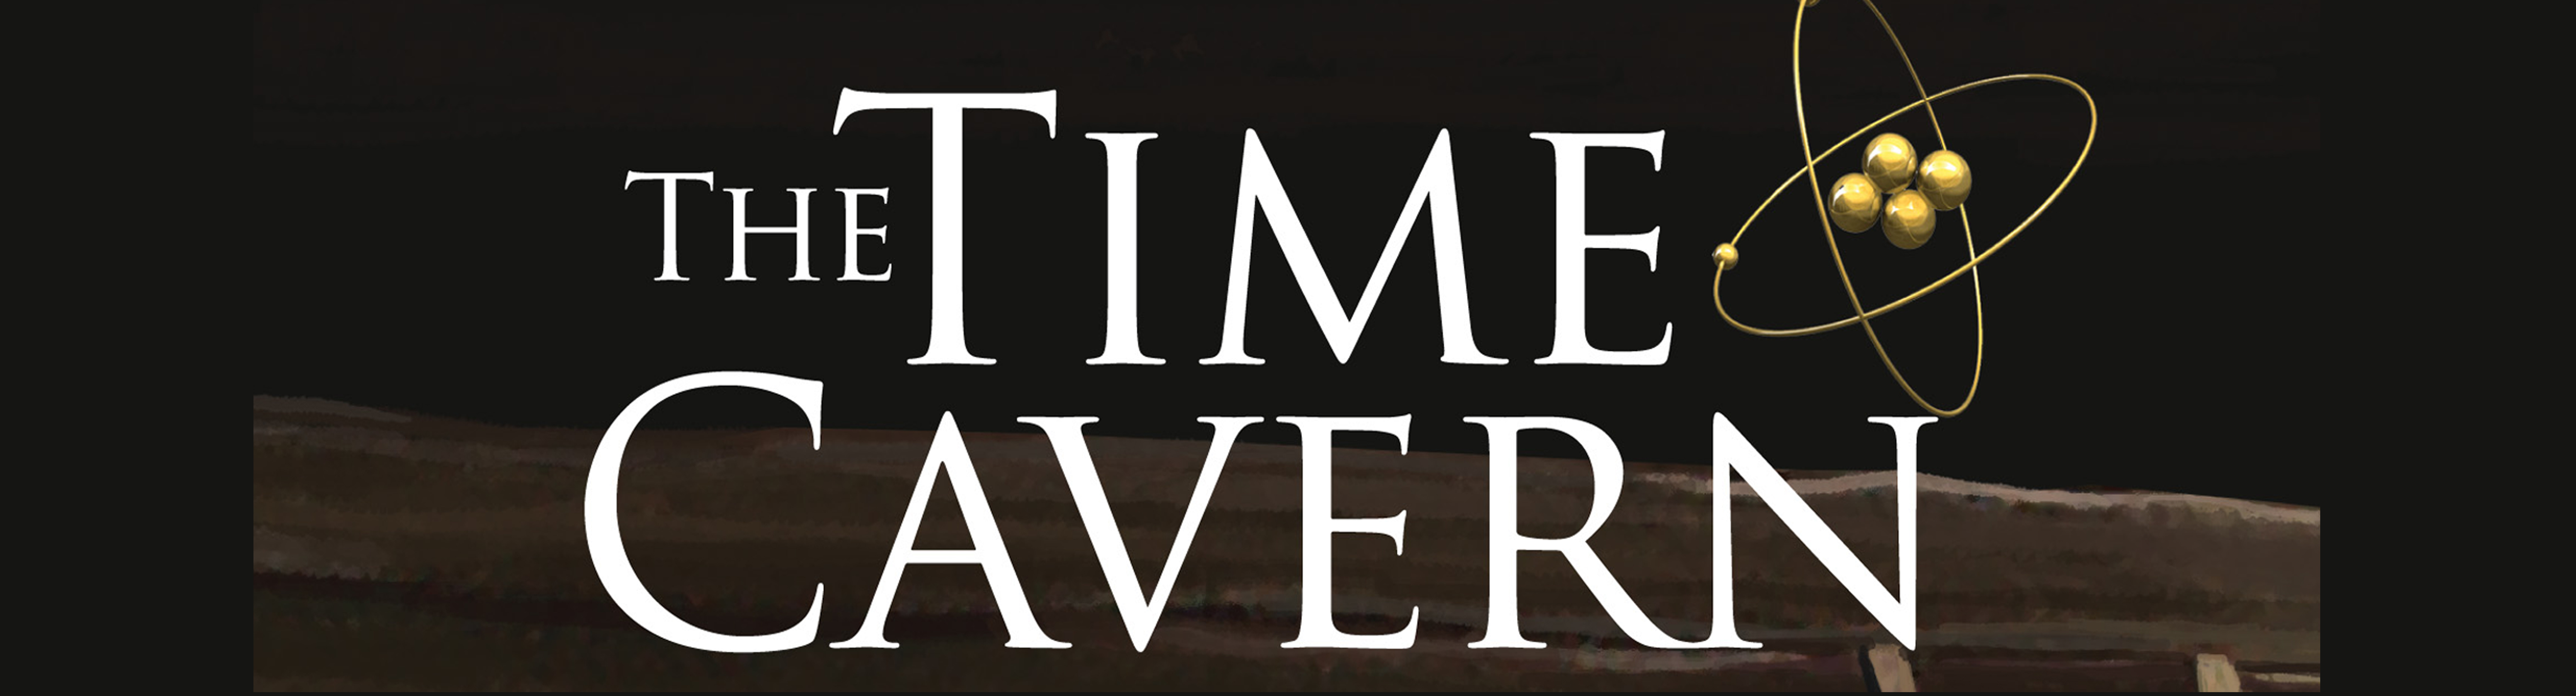 The Time Cavern Home